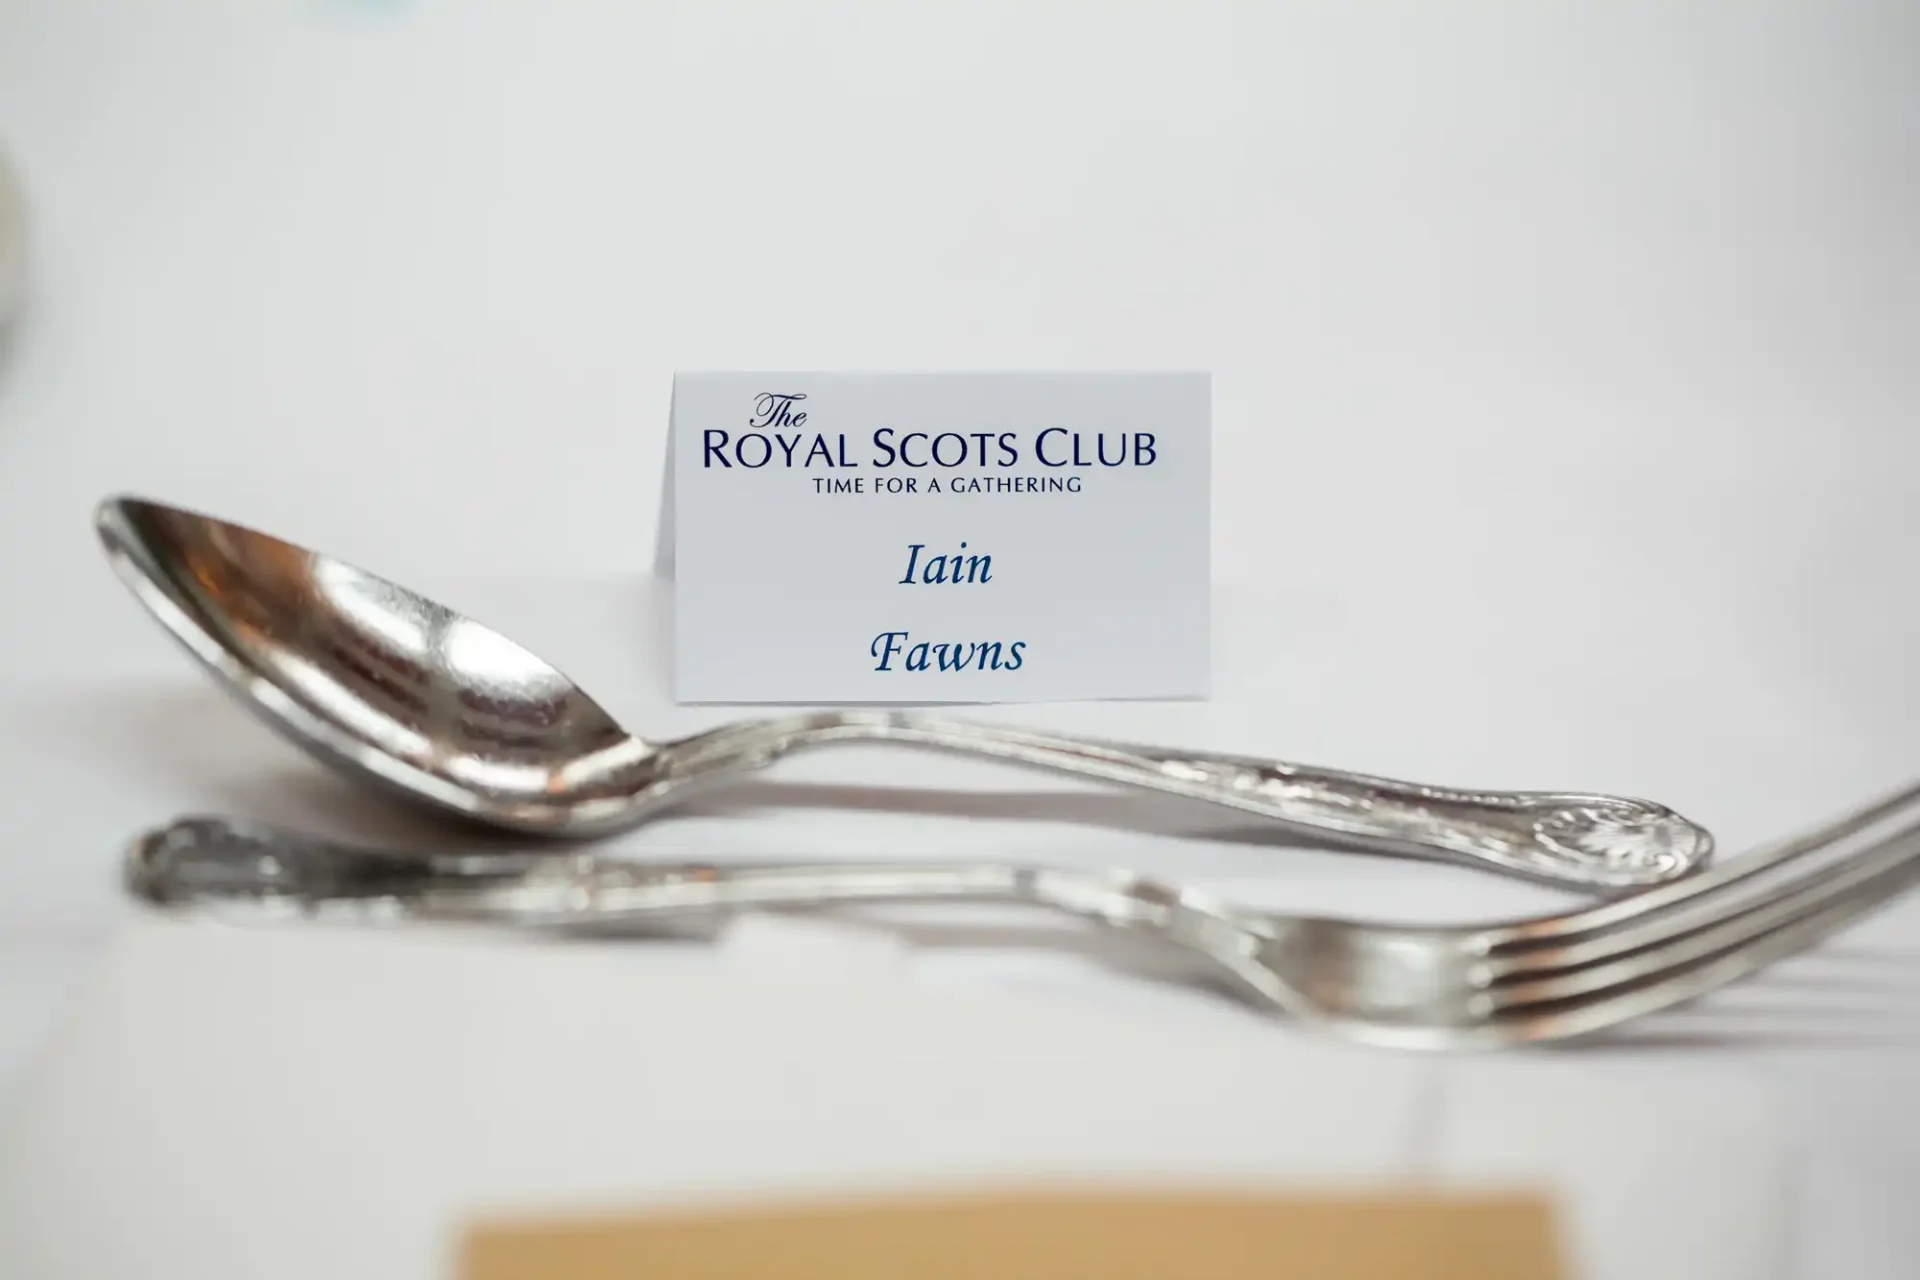 Place setting with a spoon, fork, and a name card reading "iain fawns" for the royal scots club event.